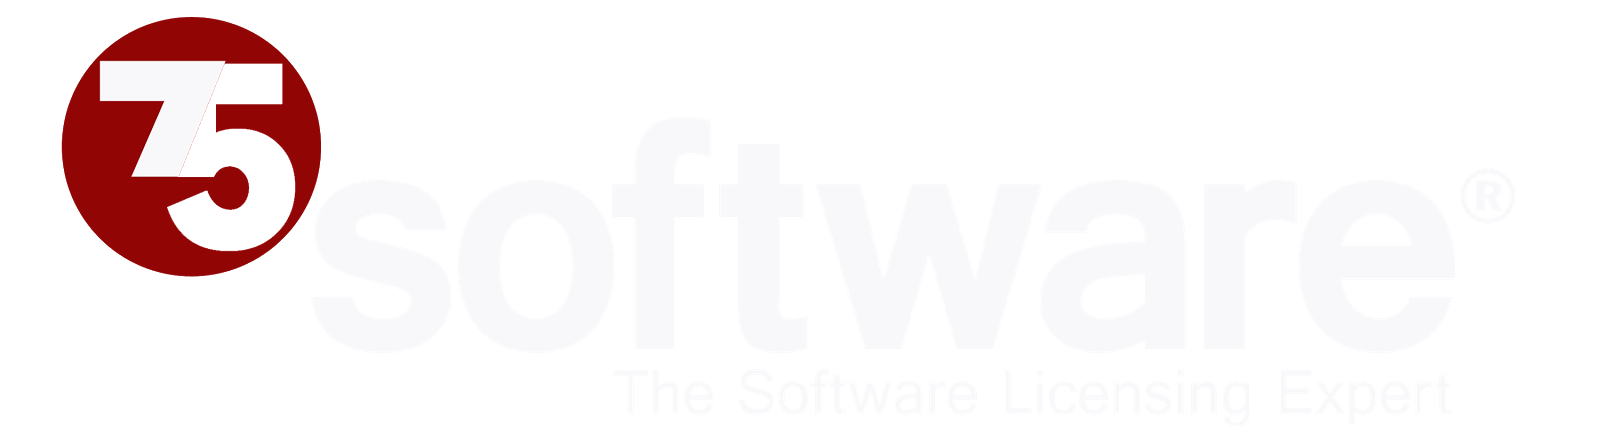 75software® | The Software Licensing Expert